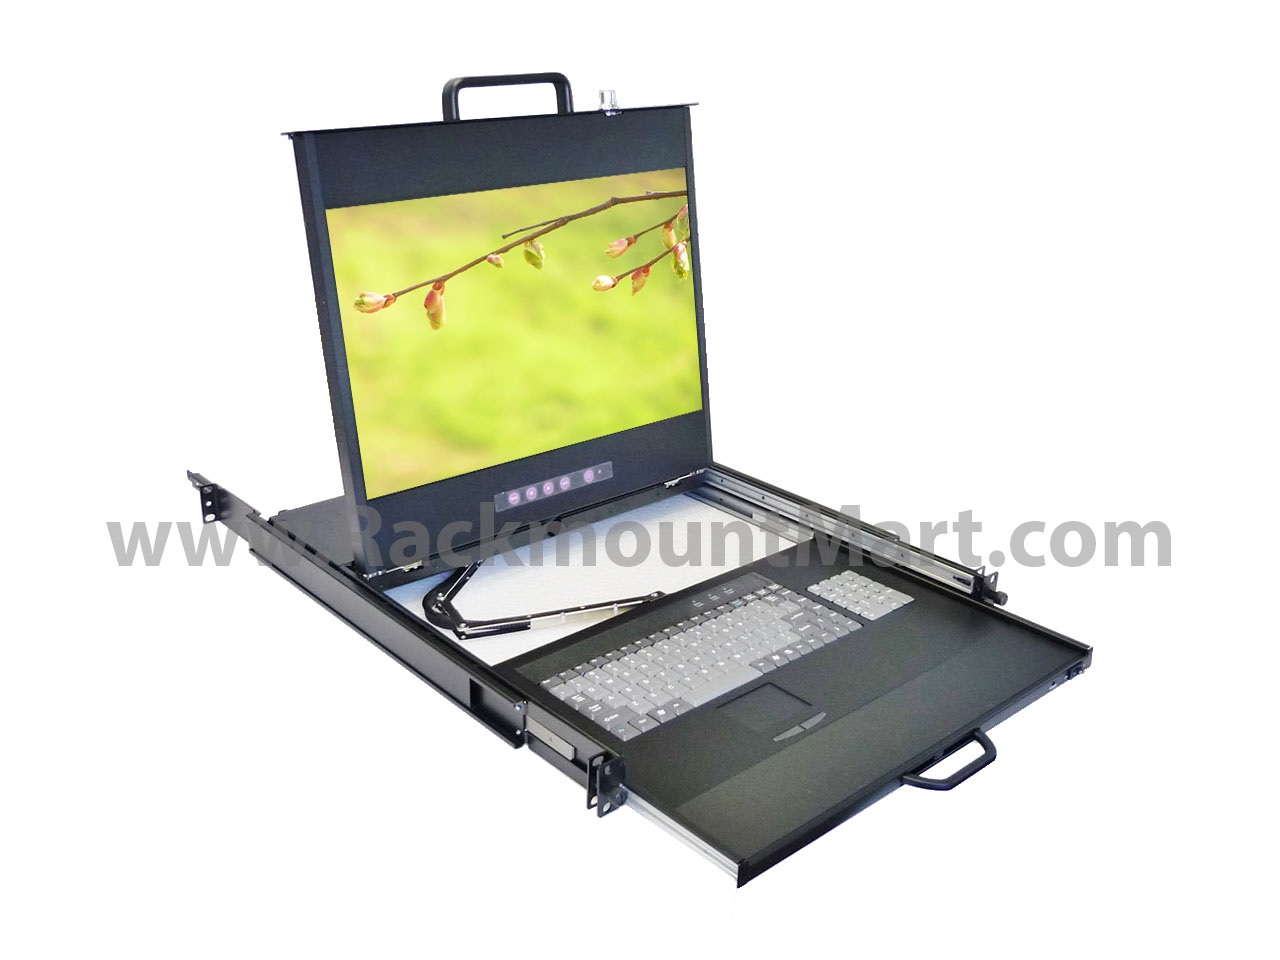 Lcd Console With Modular Kvm Switch